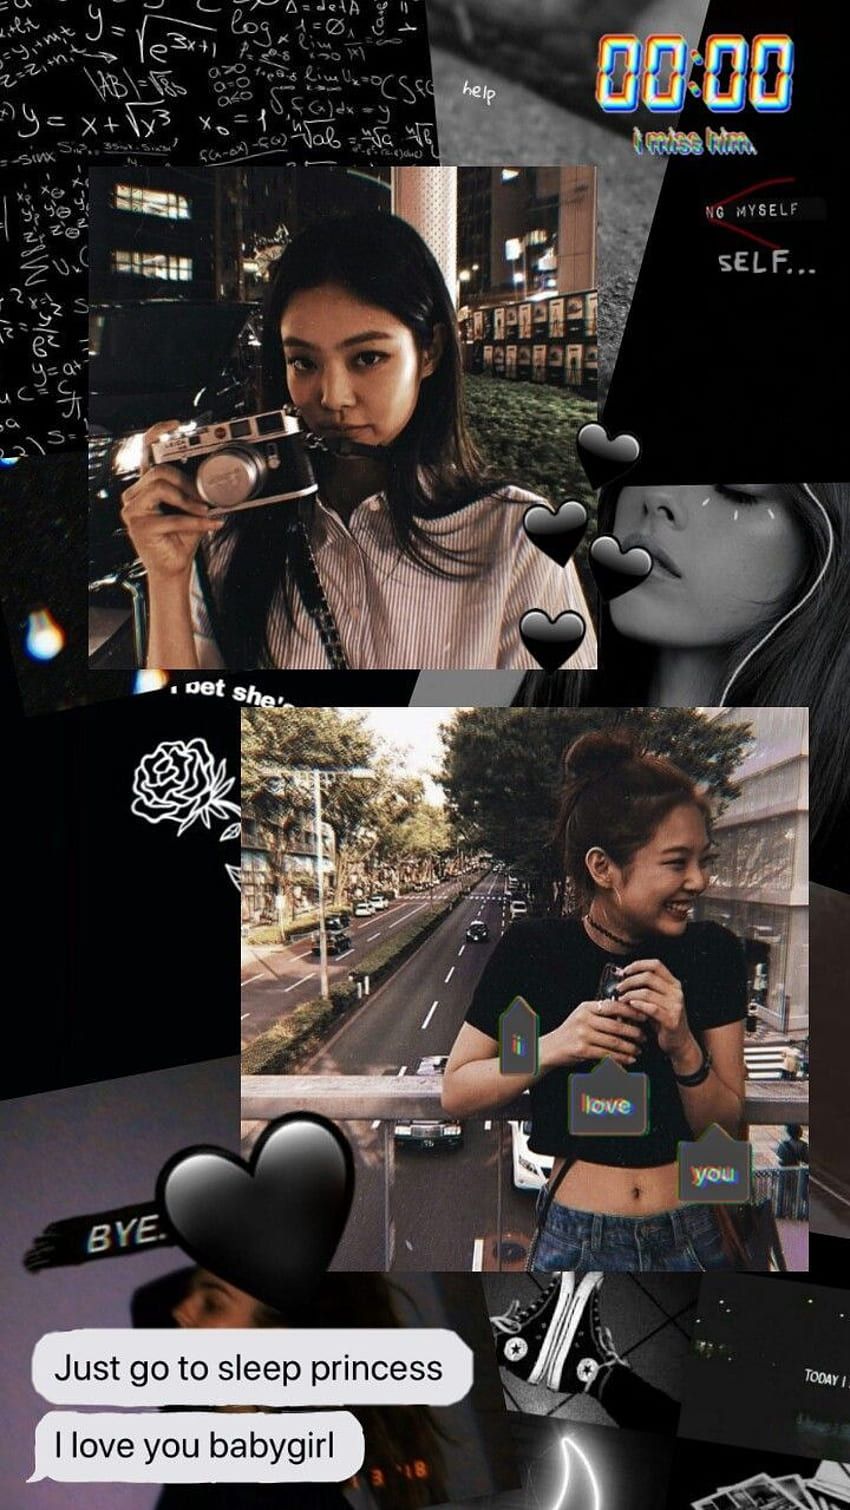 Aesthetic background with a collage of photos of a girl holding a camera, a girl smiling, a girl wearing a shirt that says 